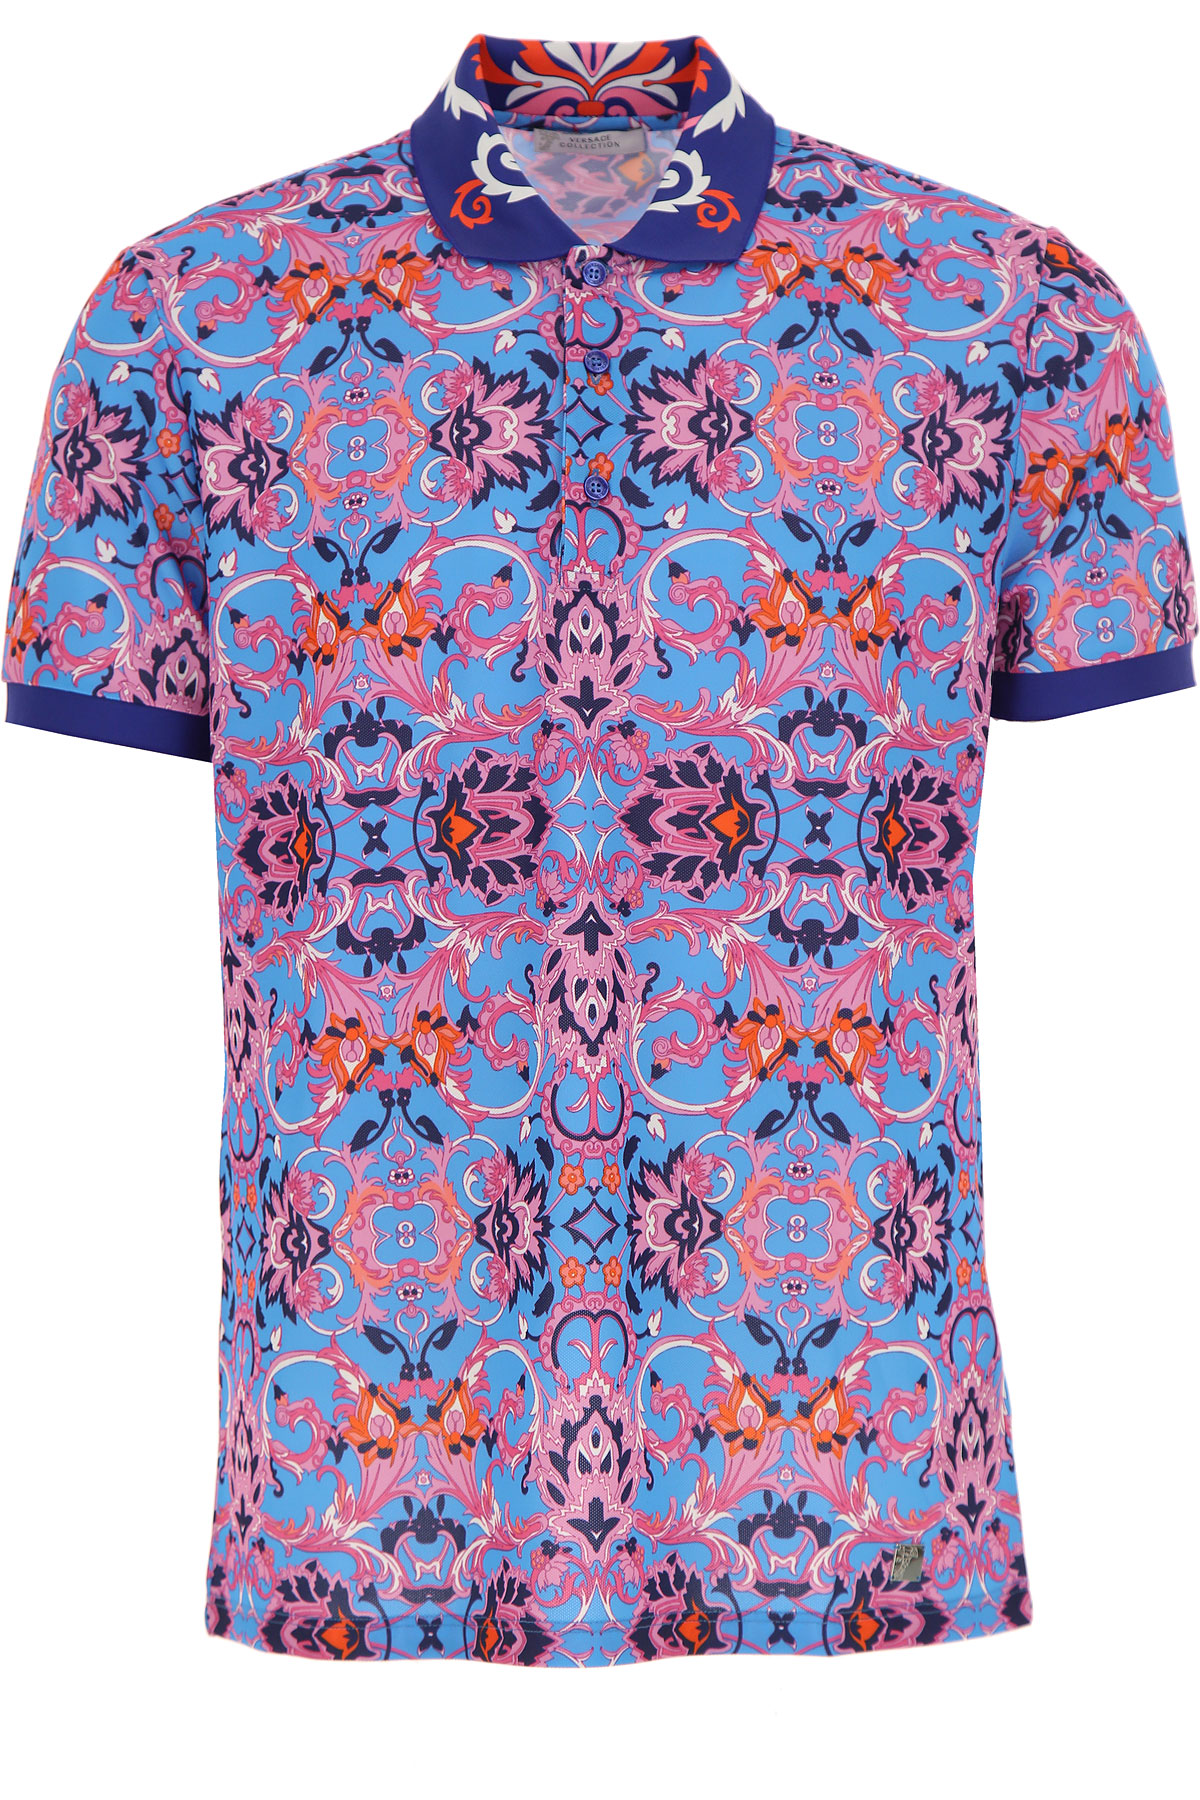 Versace Polo Homme, Versace Collection, Bluette, Polyester, 2017, L M S XL